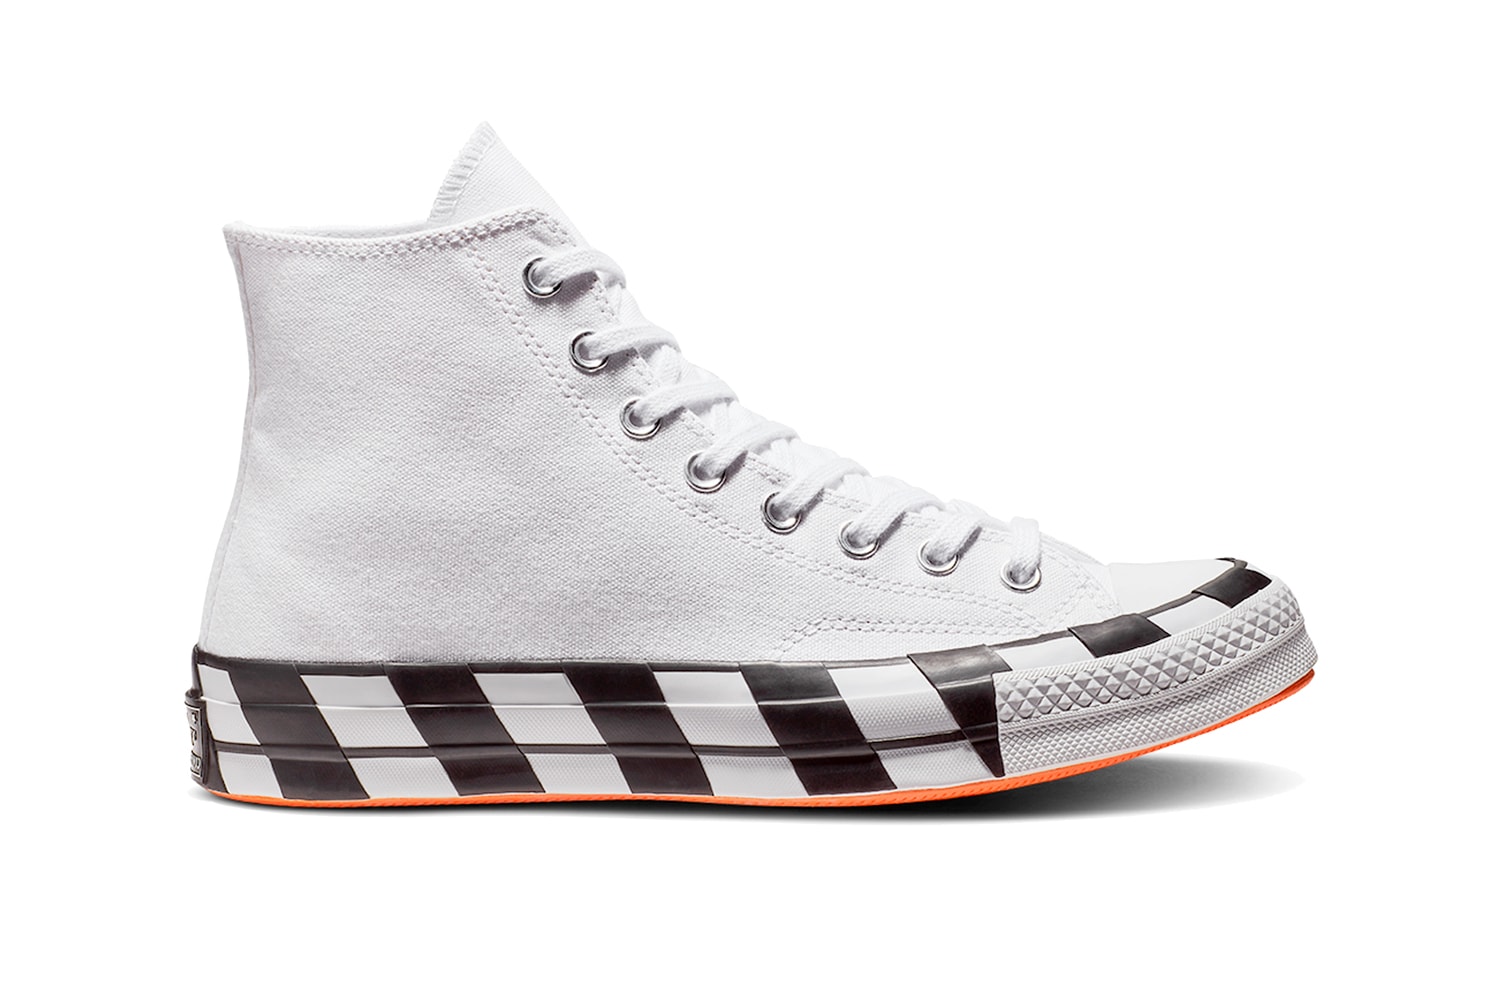 OFF-WHITE x Converse Chuck 70s 70 StockX Sneakers Shoes Trainers Kicks Footwear Cop Purchase Buy Release Date Details Virgil Abloh classic canvas vulcanized rubber industrial stamp white back text strip